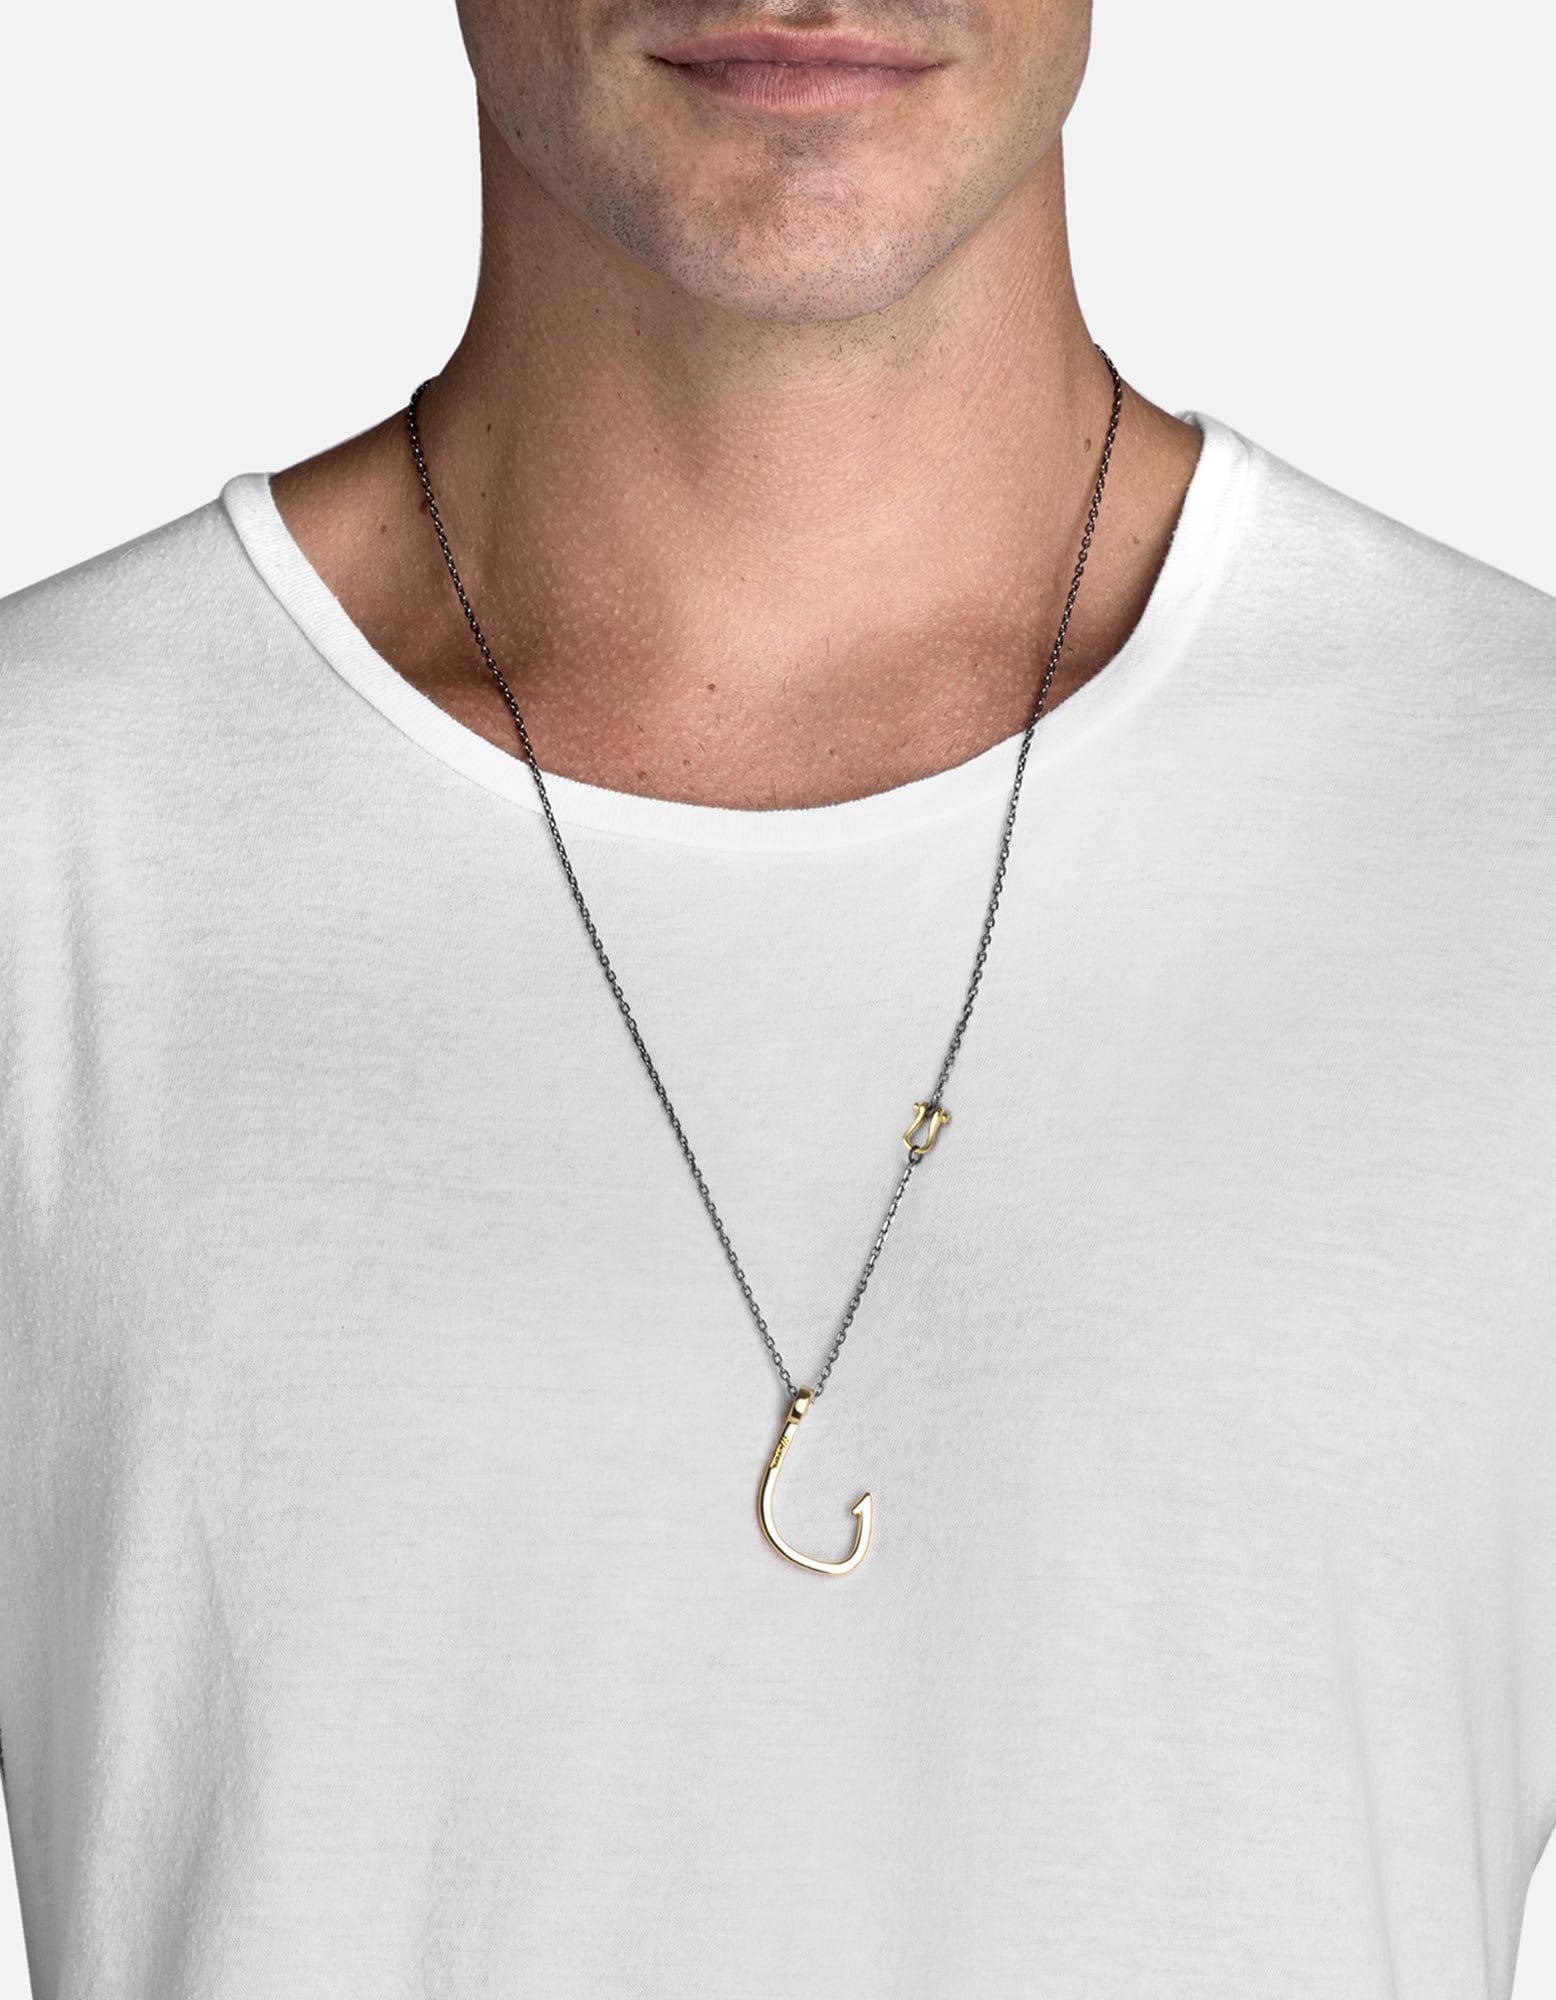 Hooked Necklace, Gold, Men's Necklaces